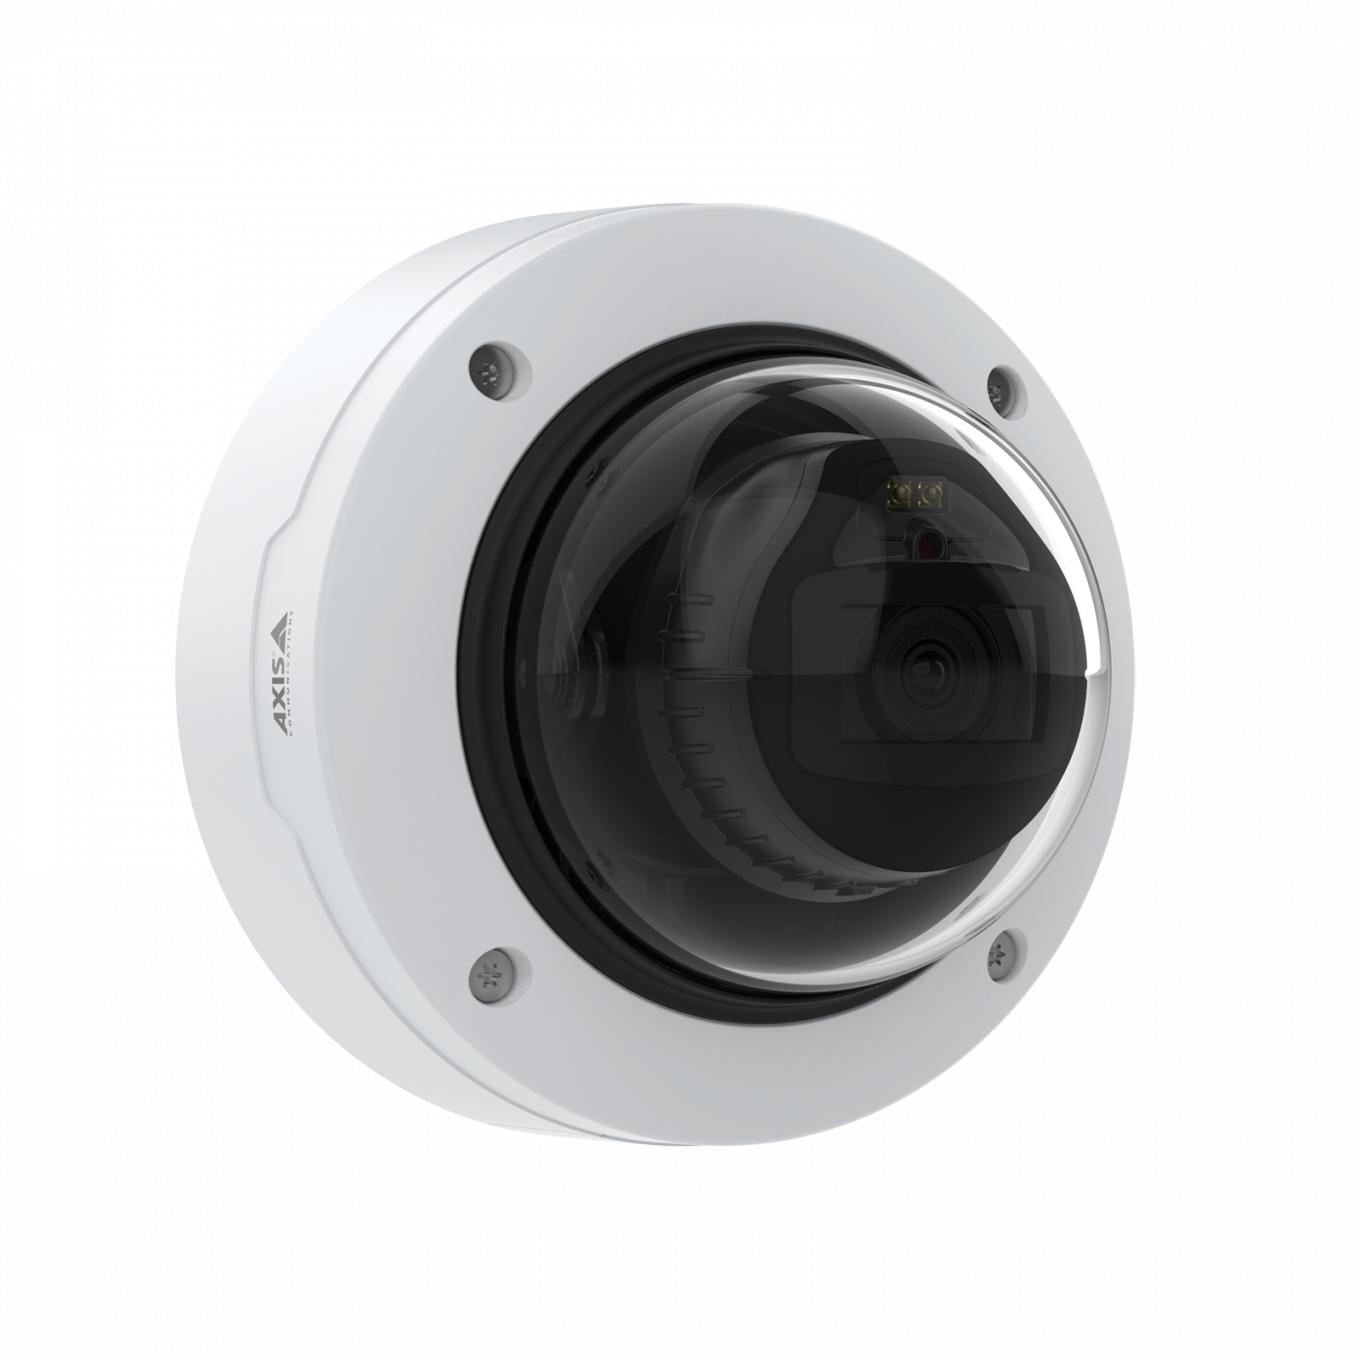 AXIS P3267-LV Dome Camera mounted on wall from right